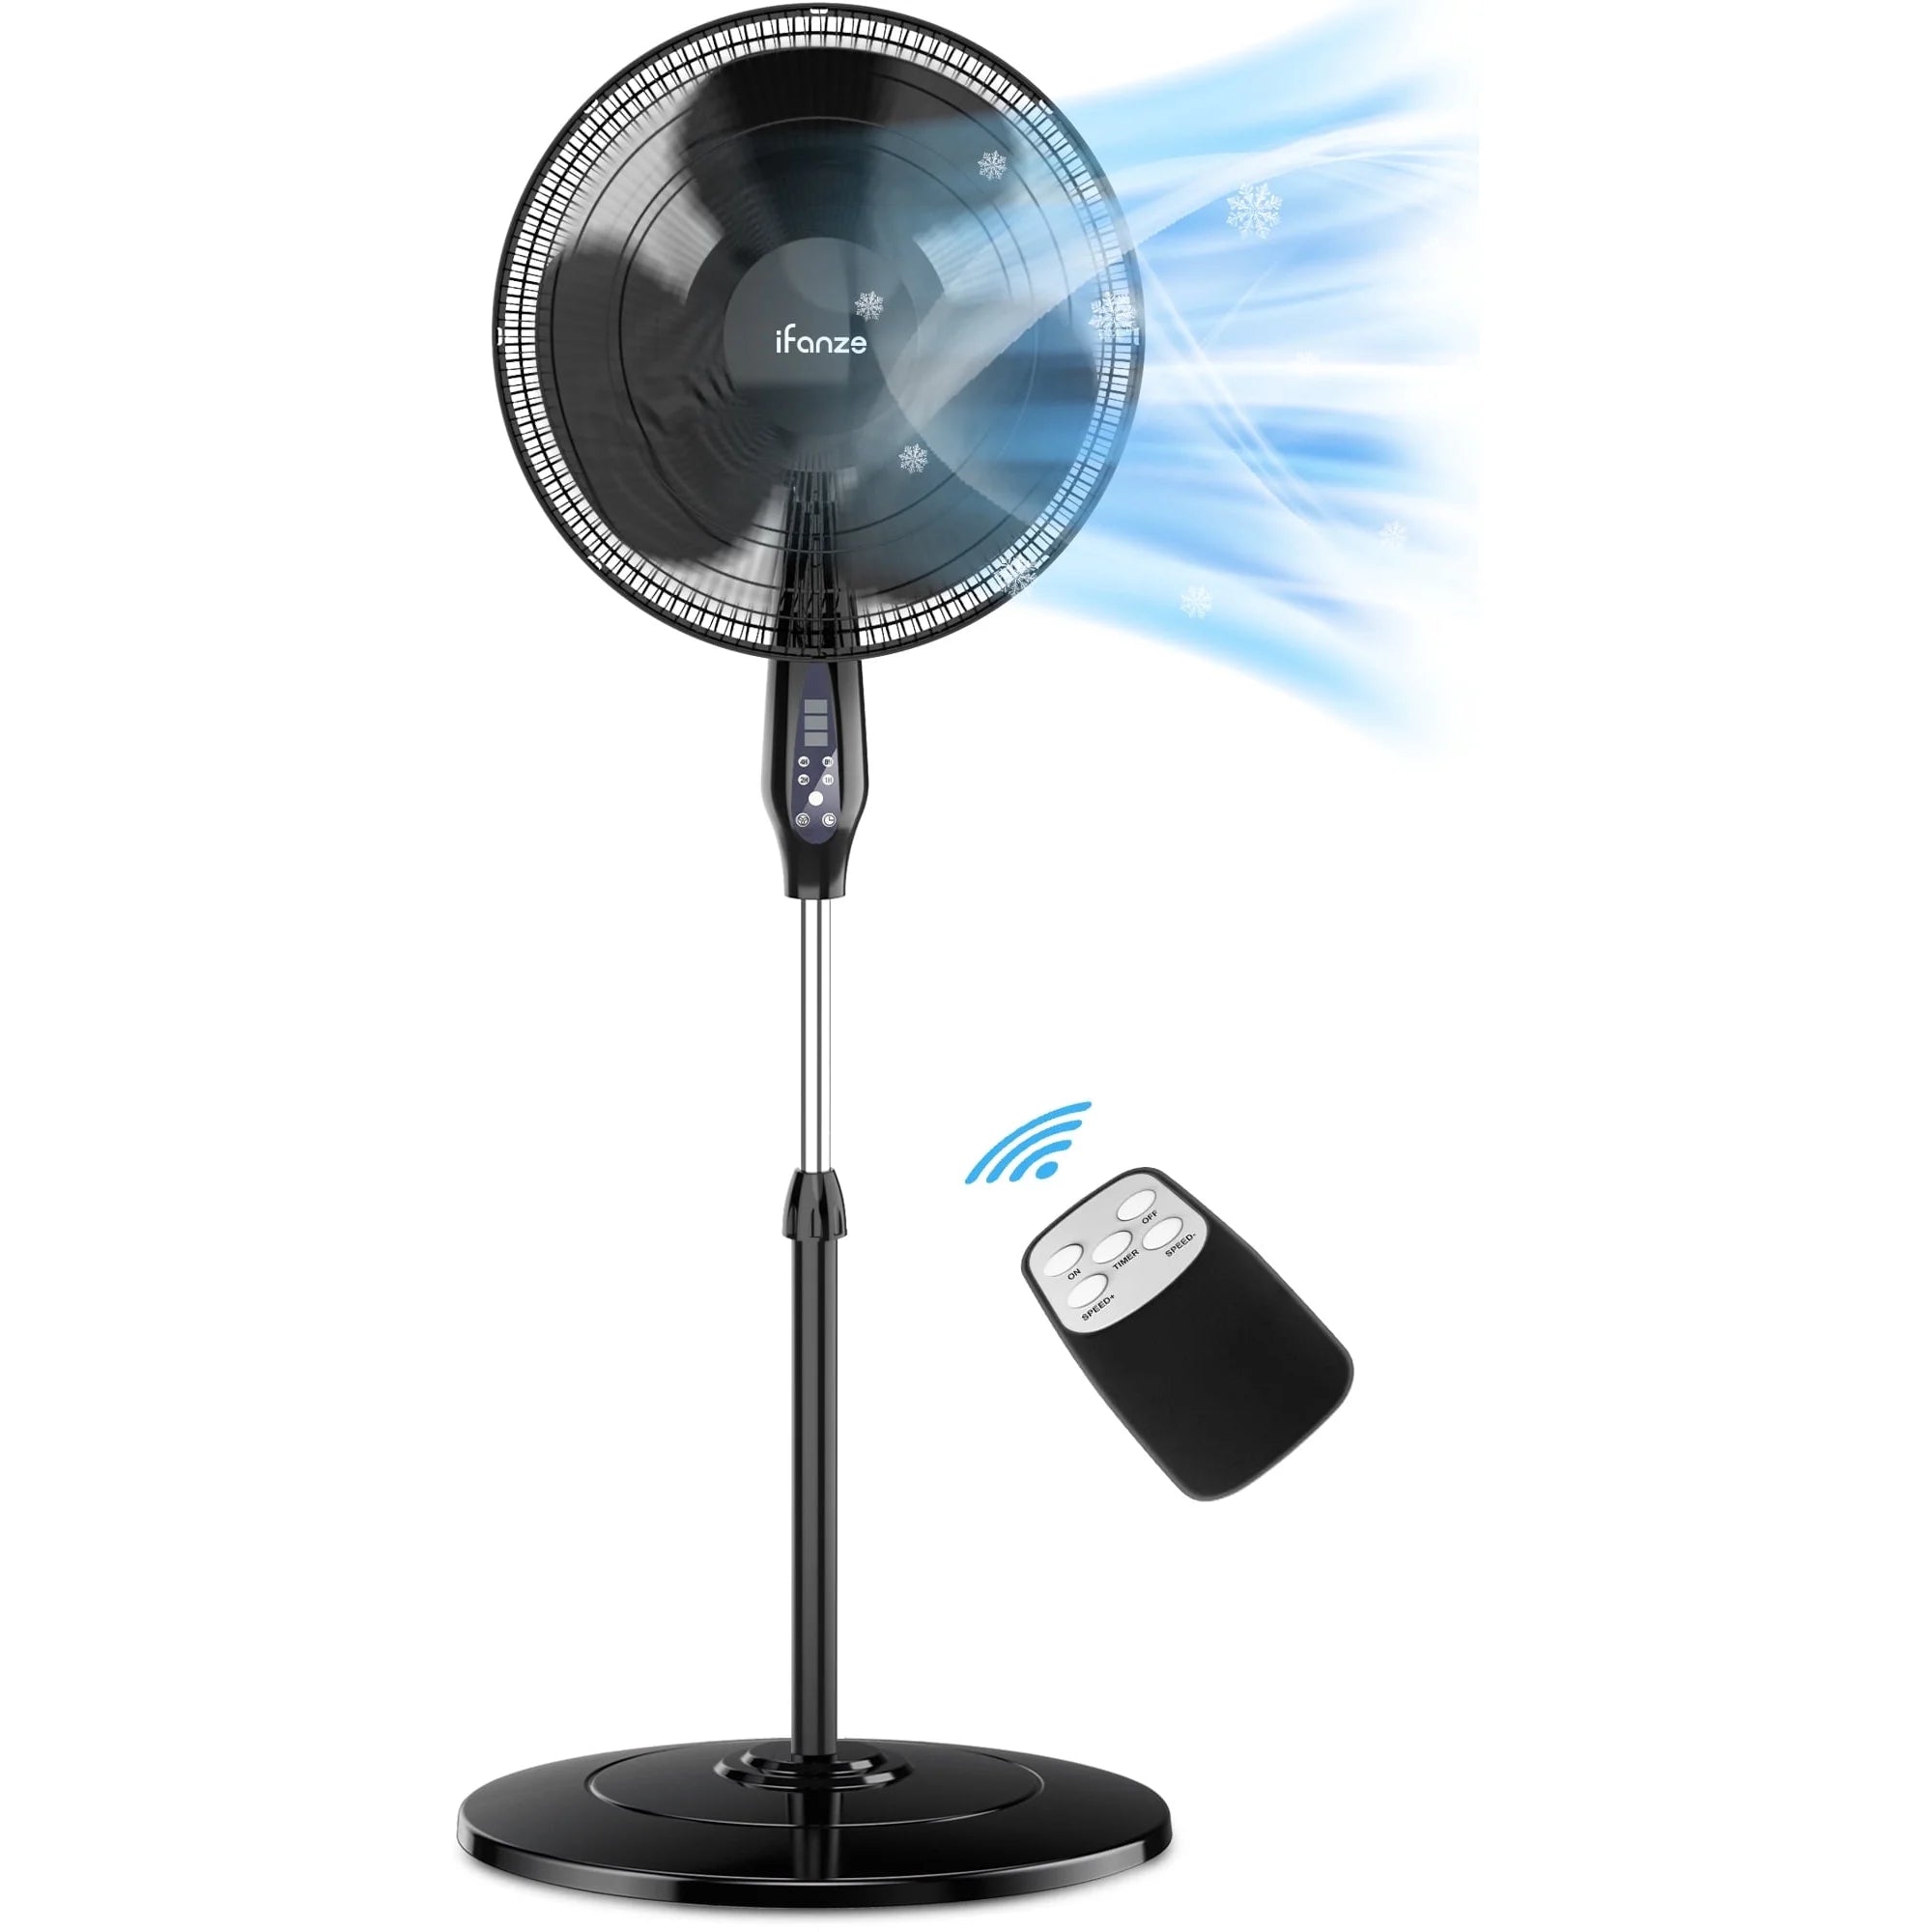 Pedestal Oscillating Fan with Remote Control